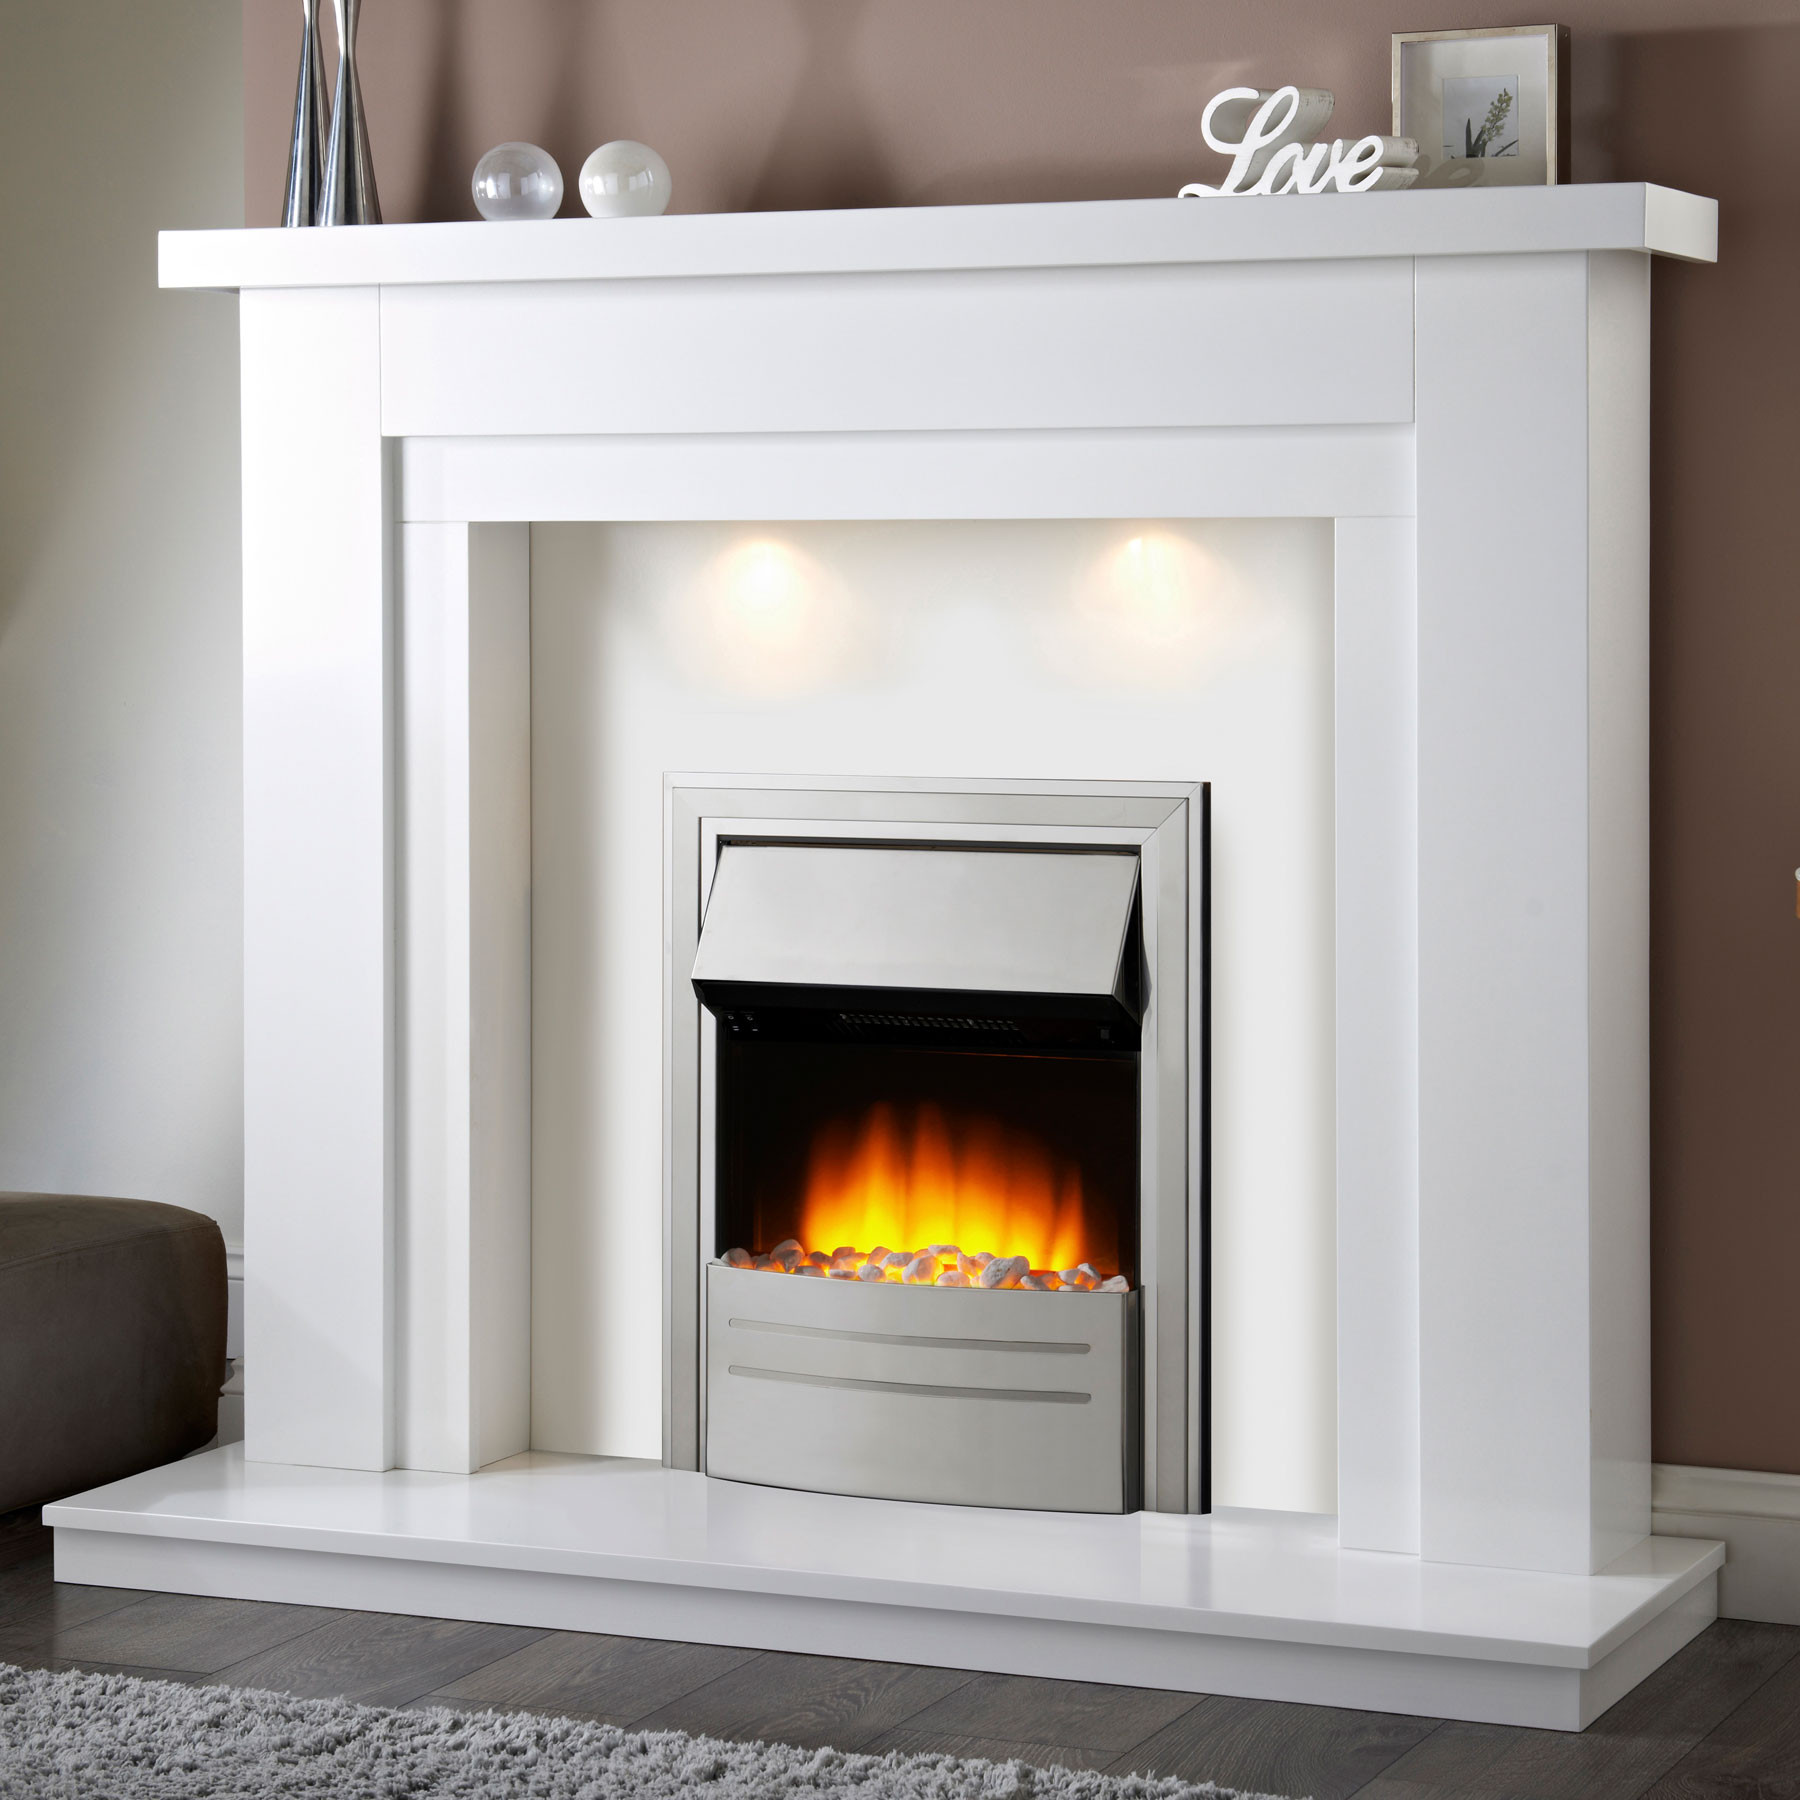 Pictures Of Electric Fireplaces Luxury White Fireplace Electric Charming Fireplace